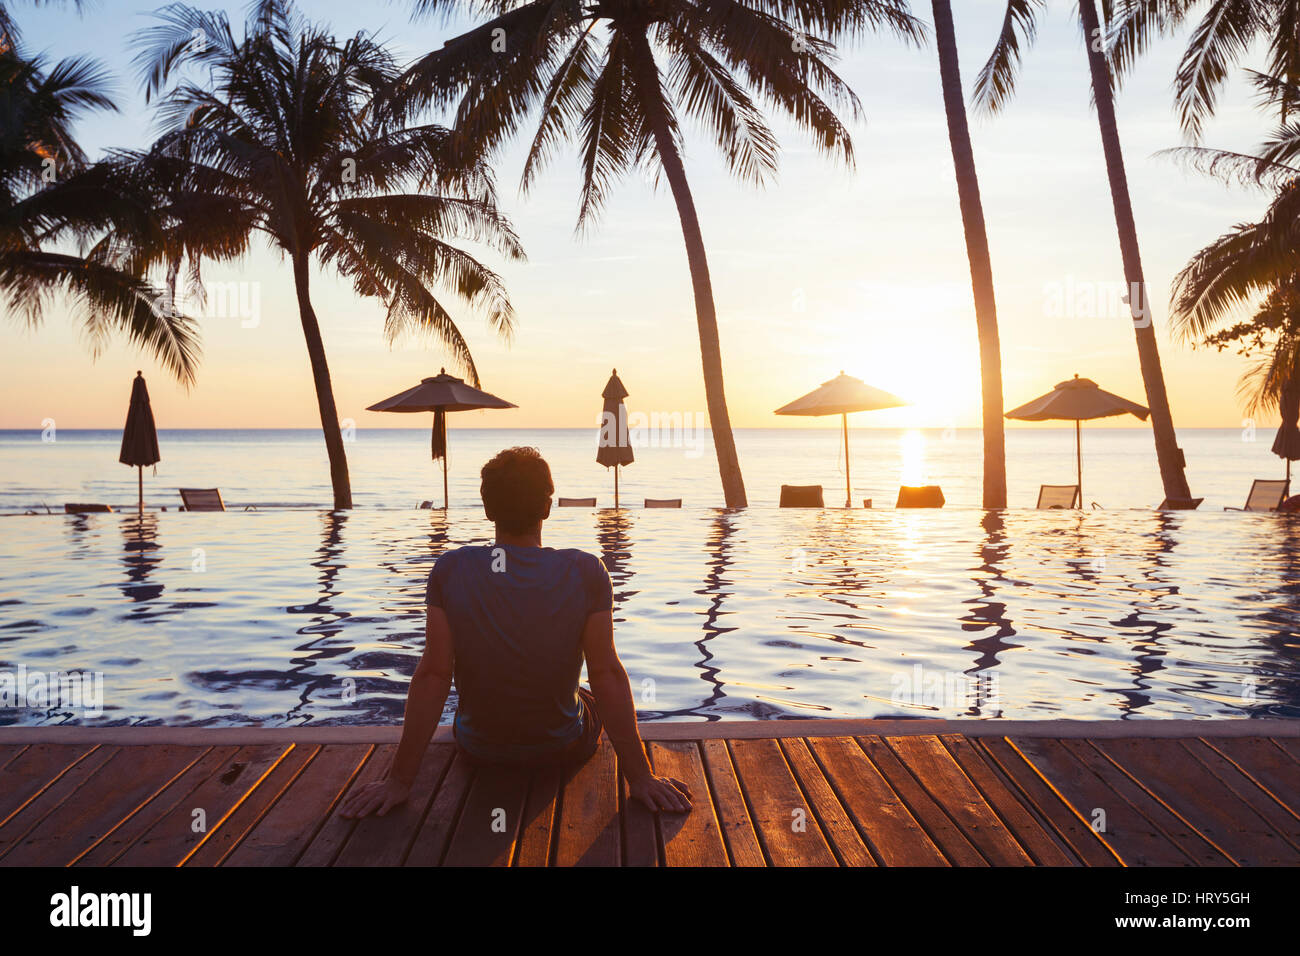 relaxation on the beach, young man enjoying beautiful sunset in luxury hotel near swimming pool Stock Photo